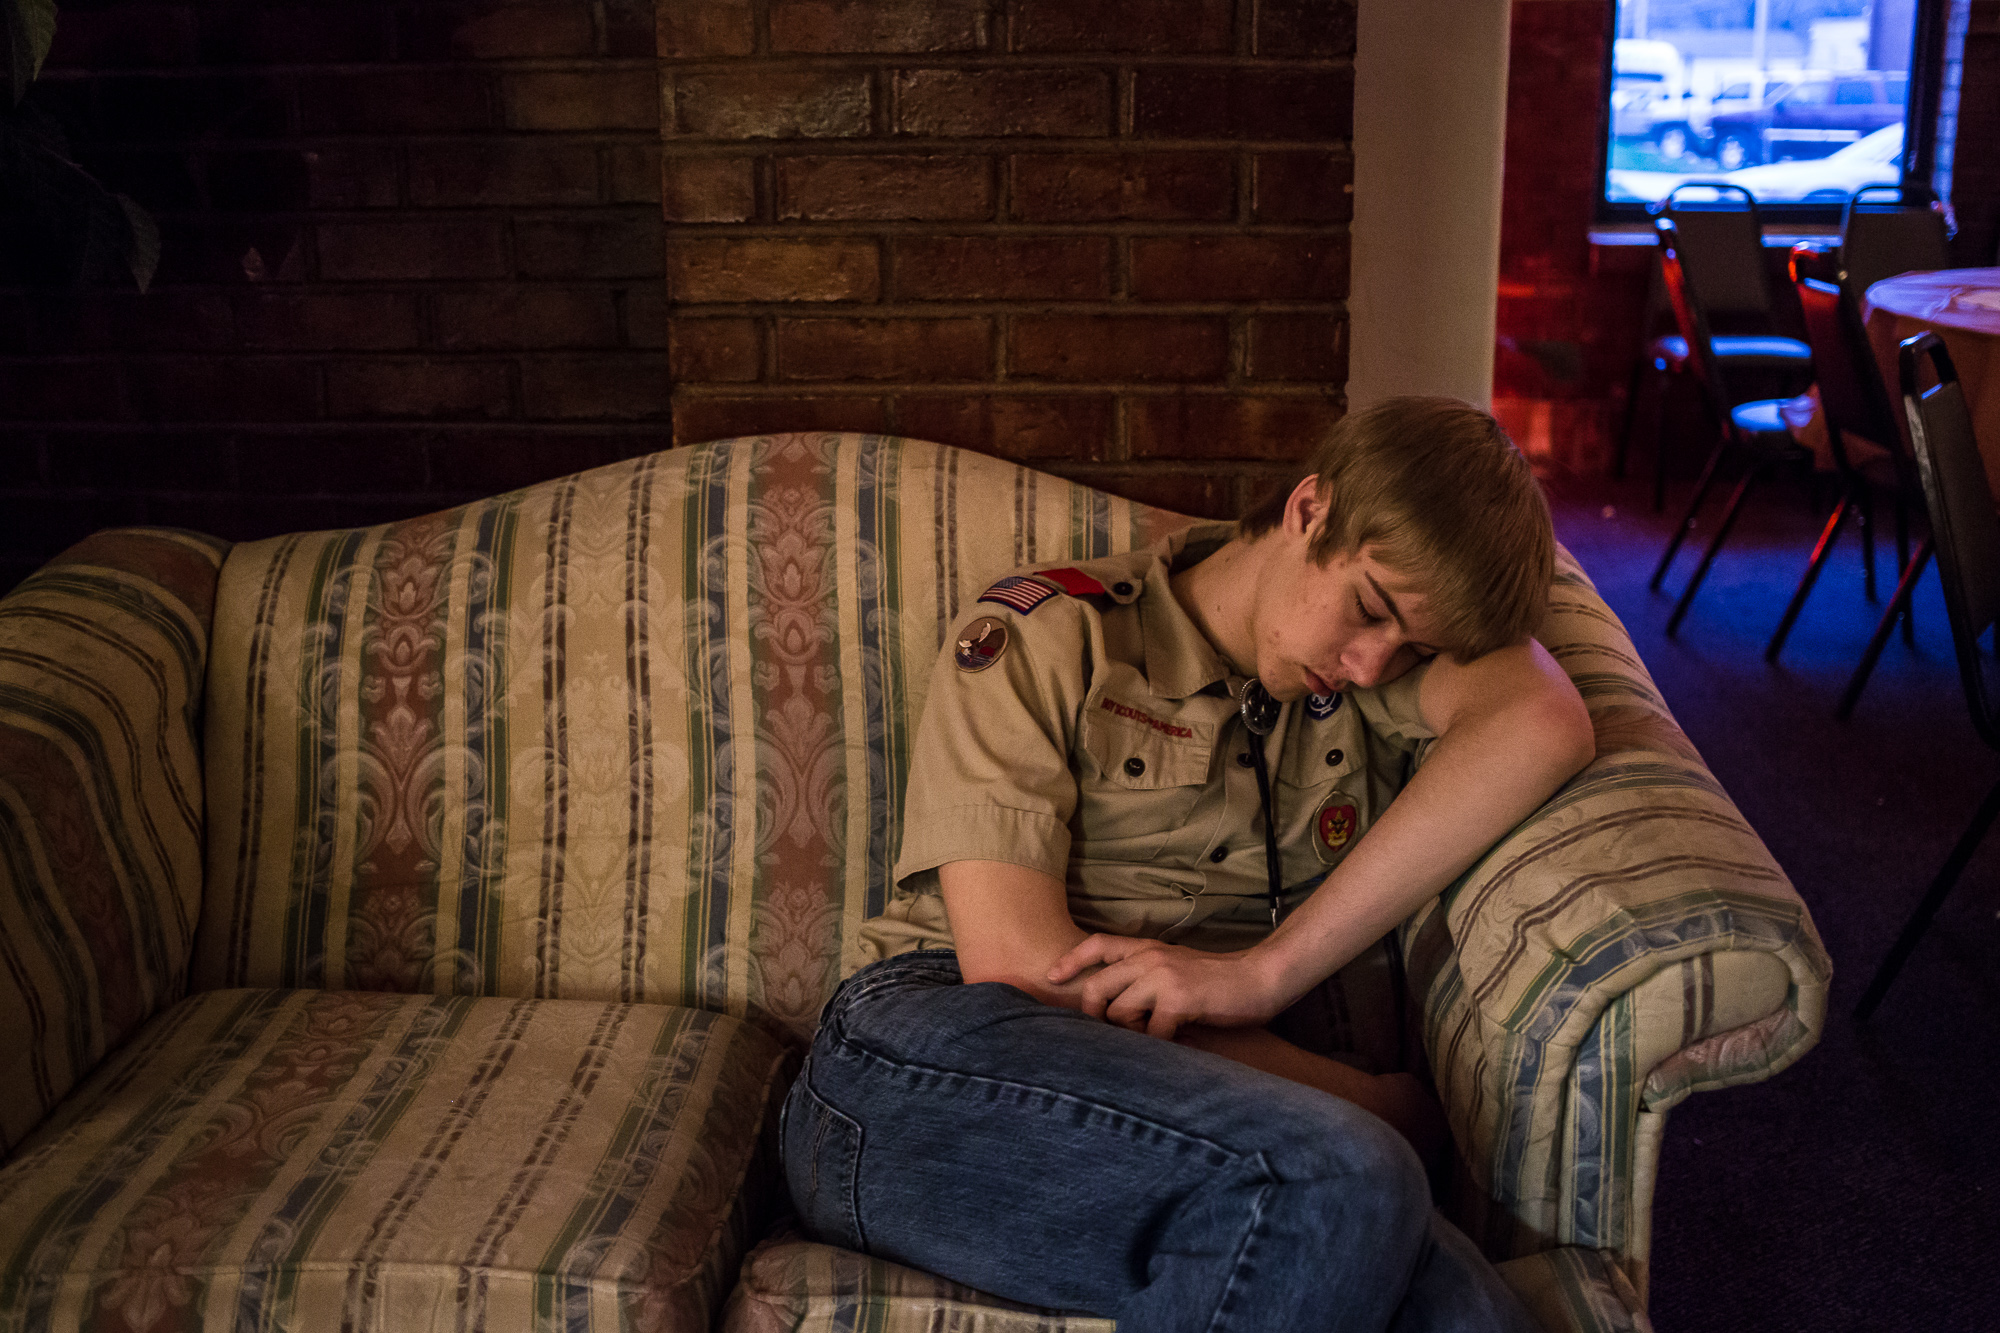  A scout sleeps as Boy Scout Troop 511 holds a mother/son dance on Saturday, April 20, 2013 in Webster City, IA. 